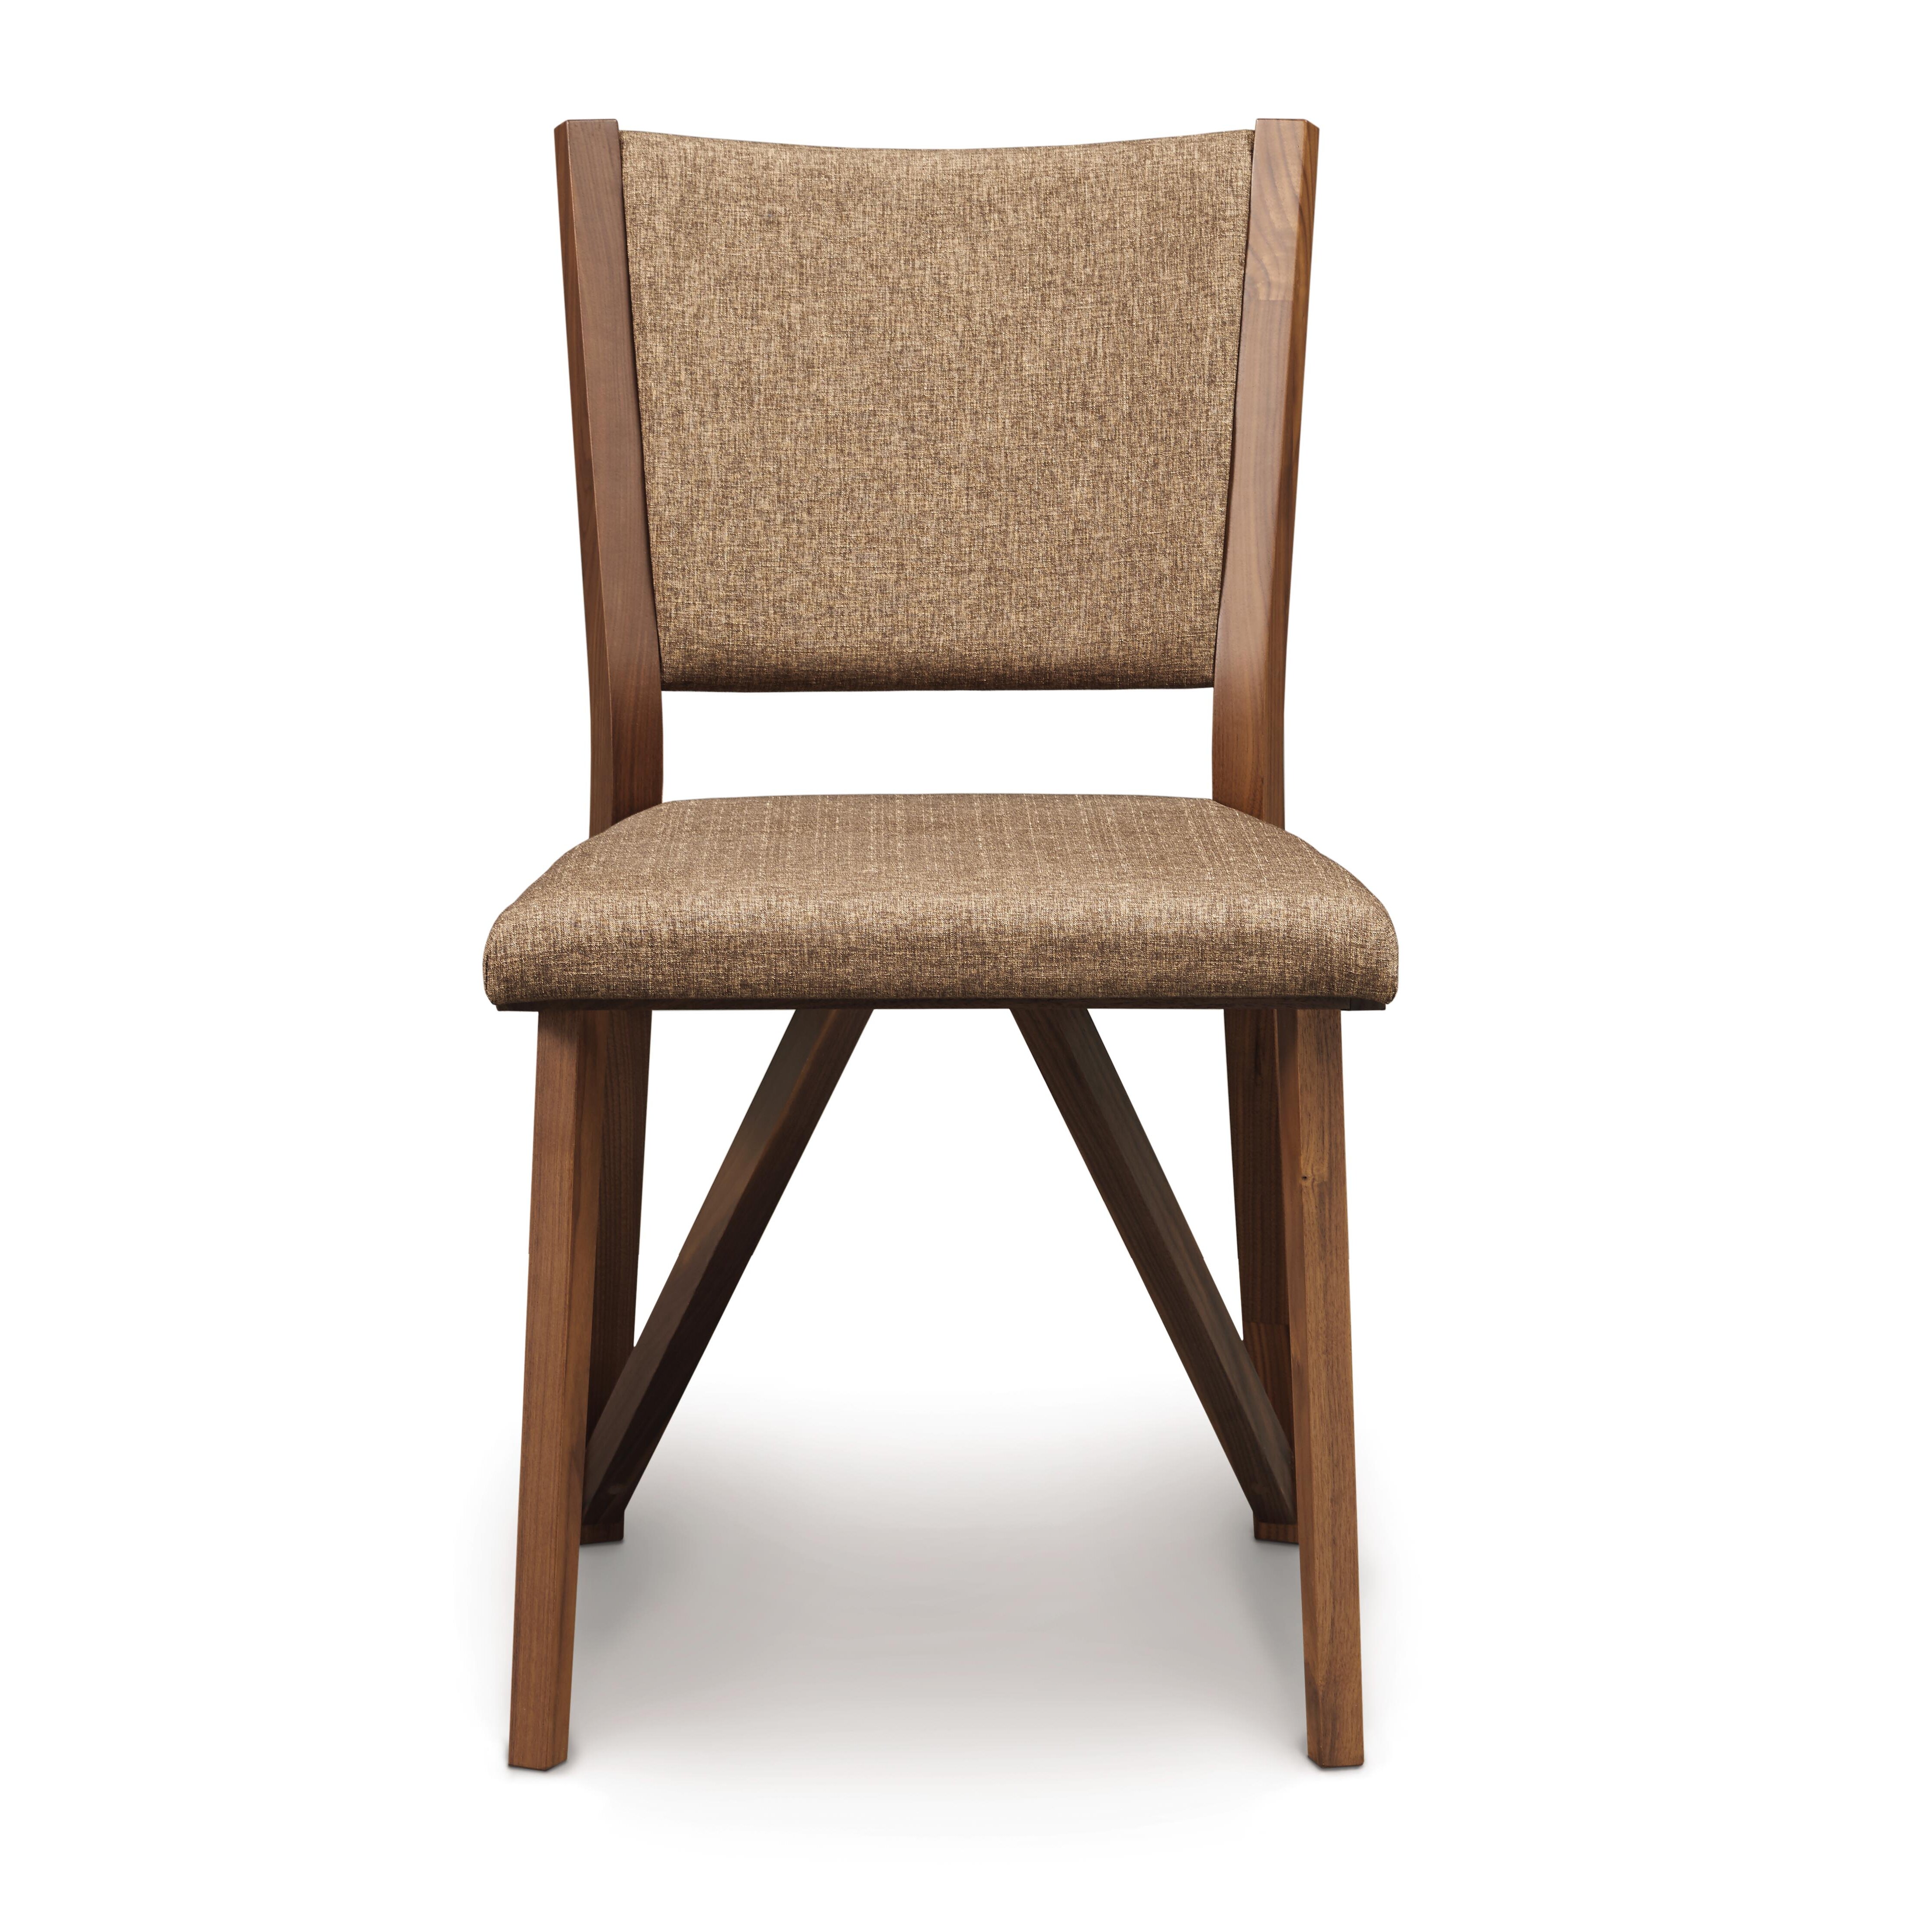 Copeland Furniture Exeter Upholstered Side Chair Wayfair